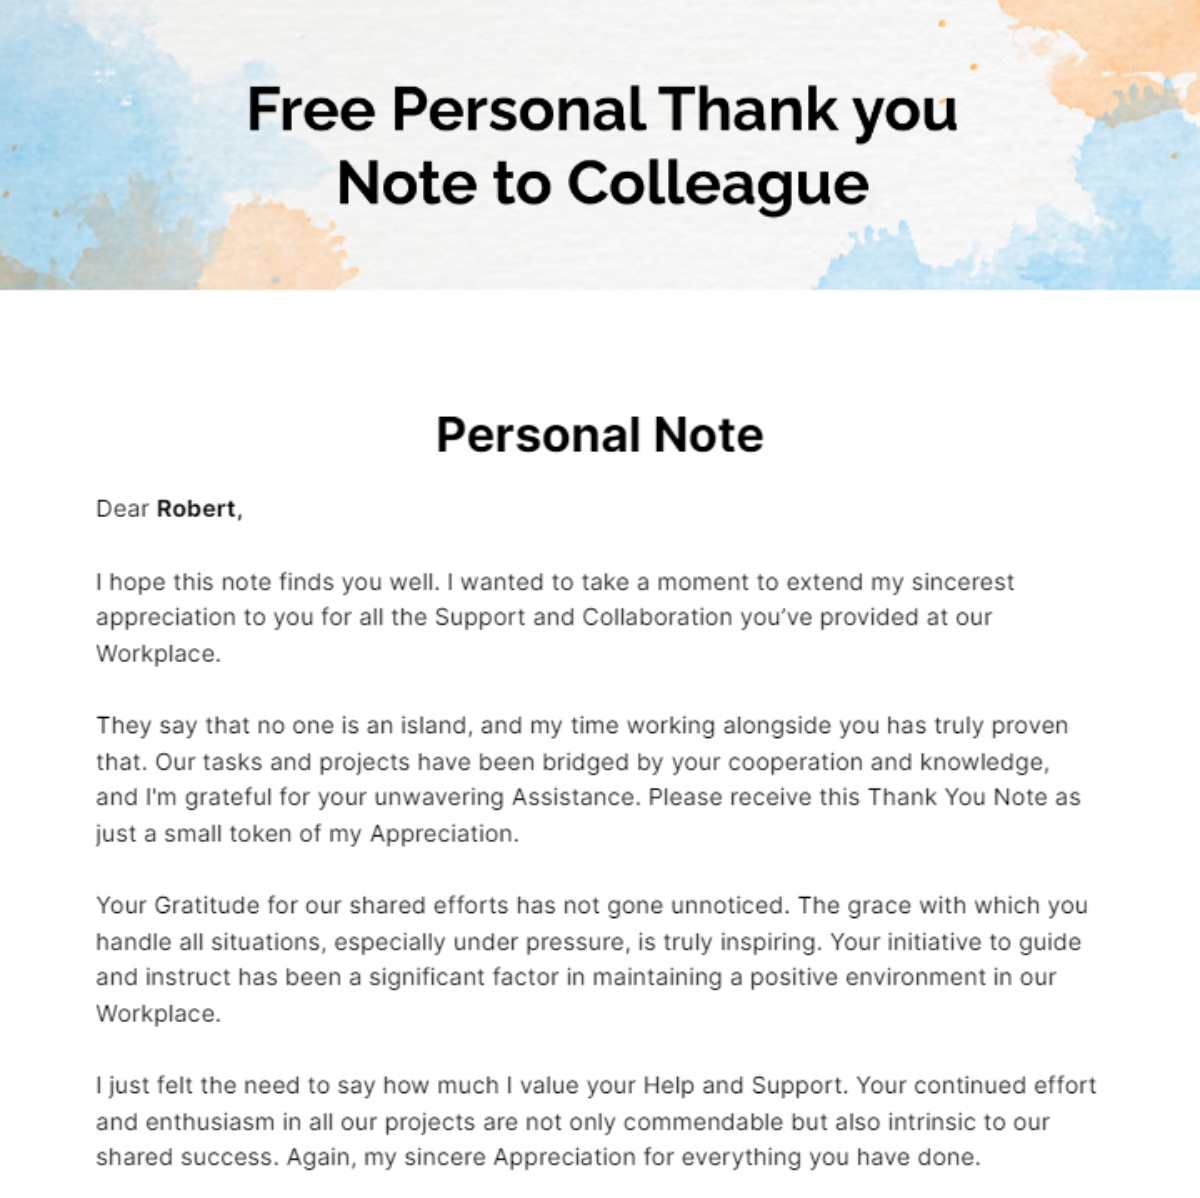 Personal Thank you Note to Colleague Template